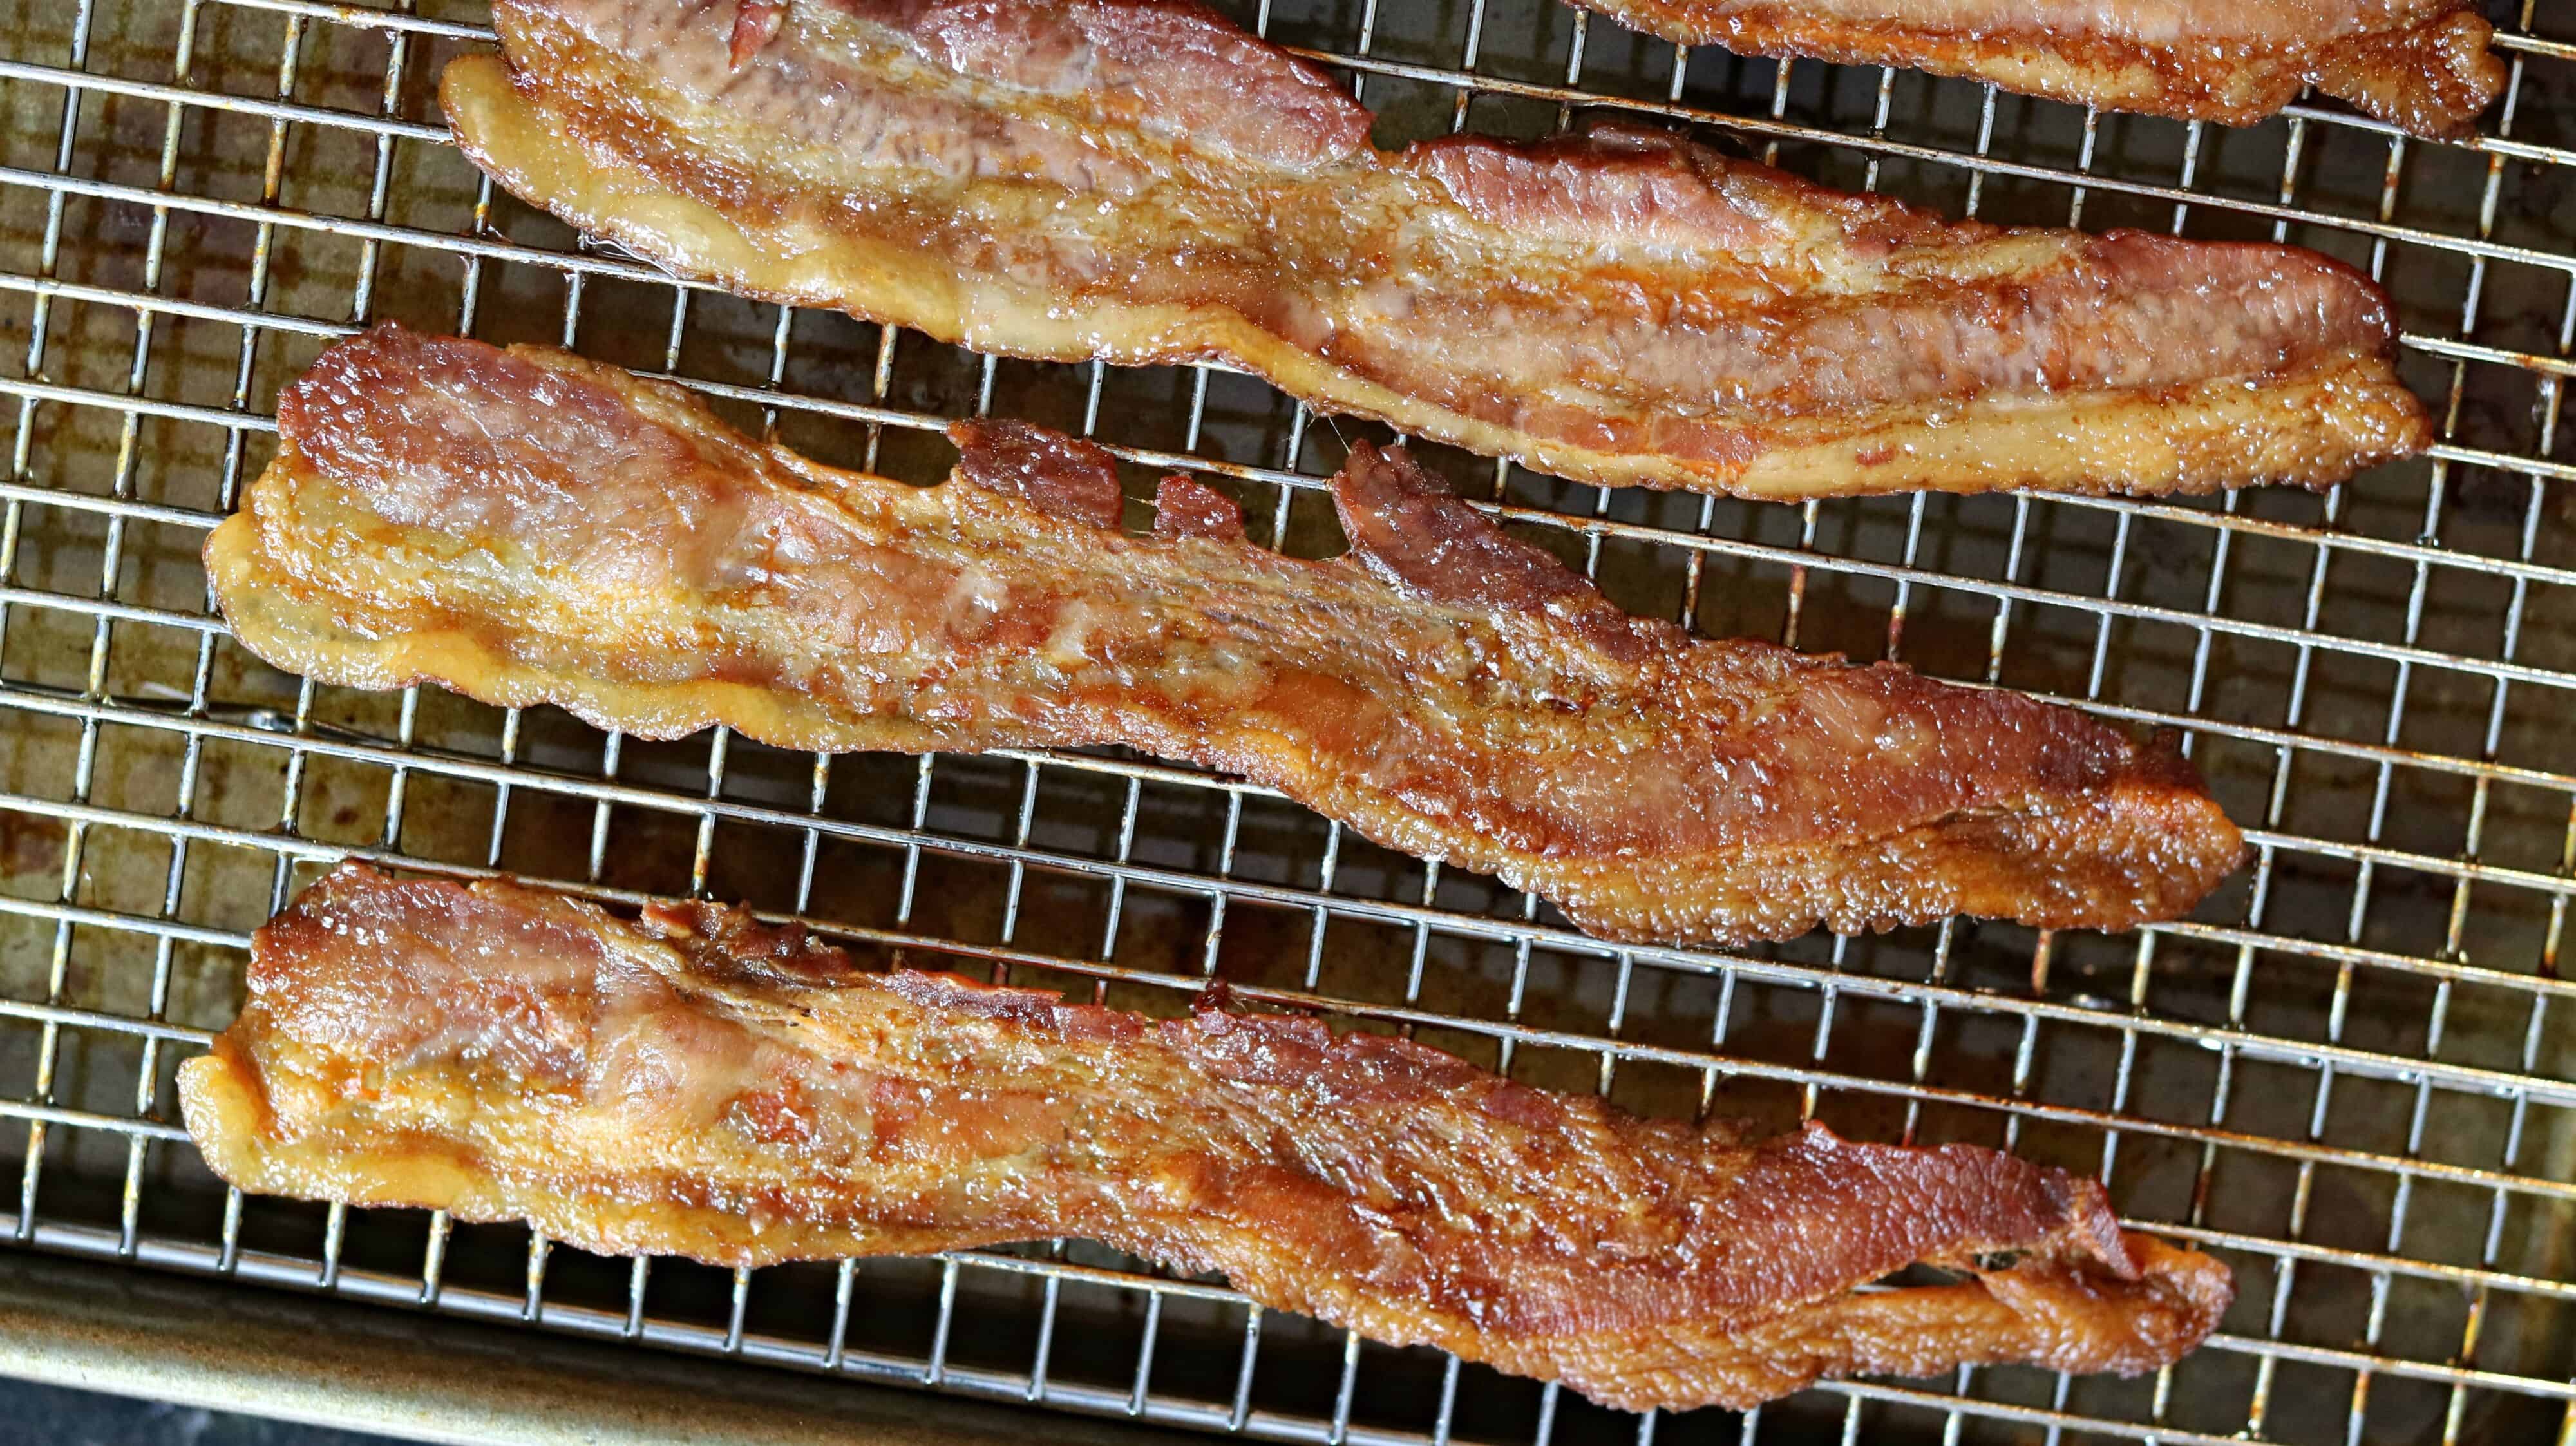 Slices of cooked bacon on a baking sheet